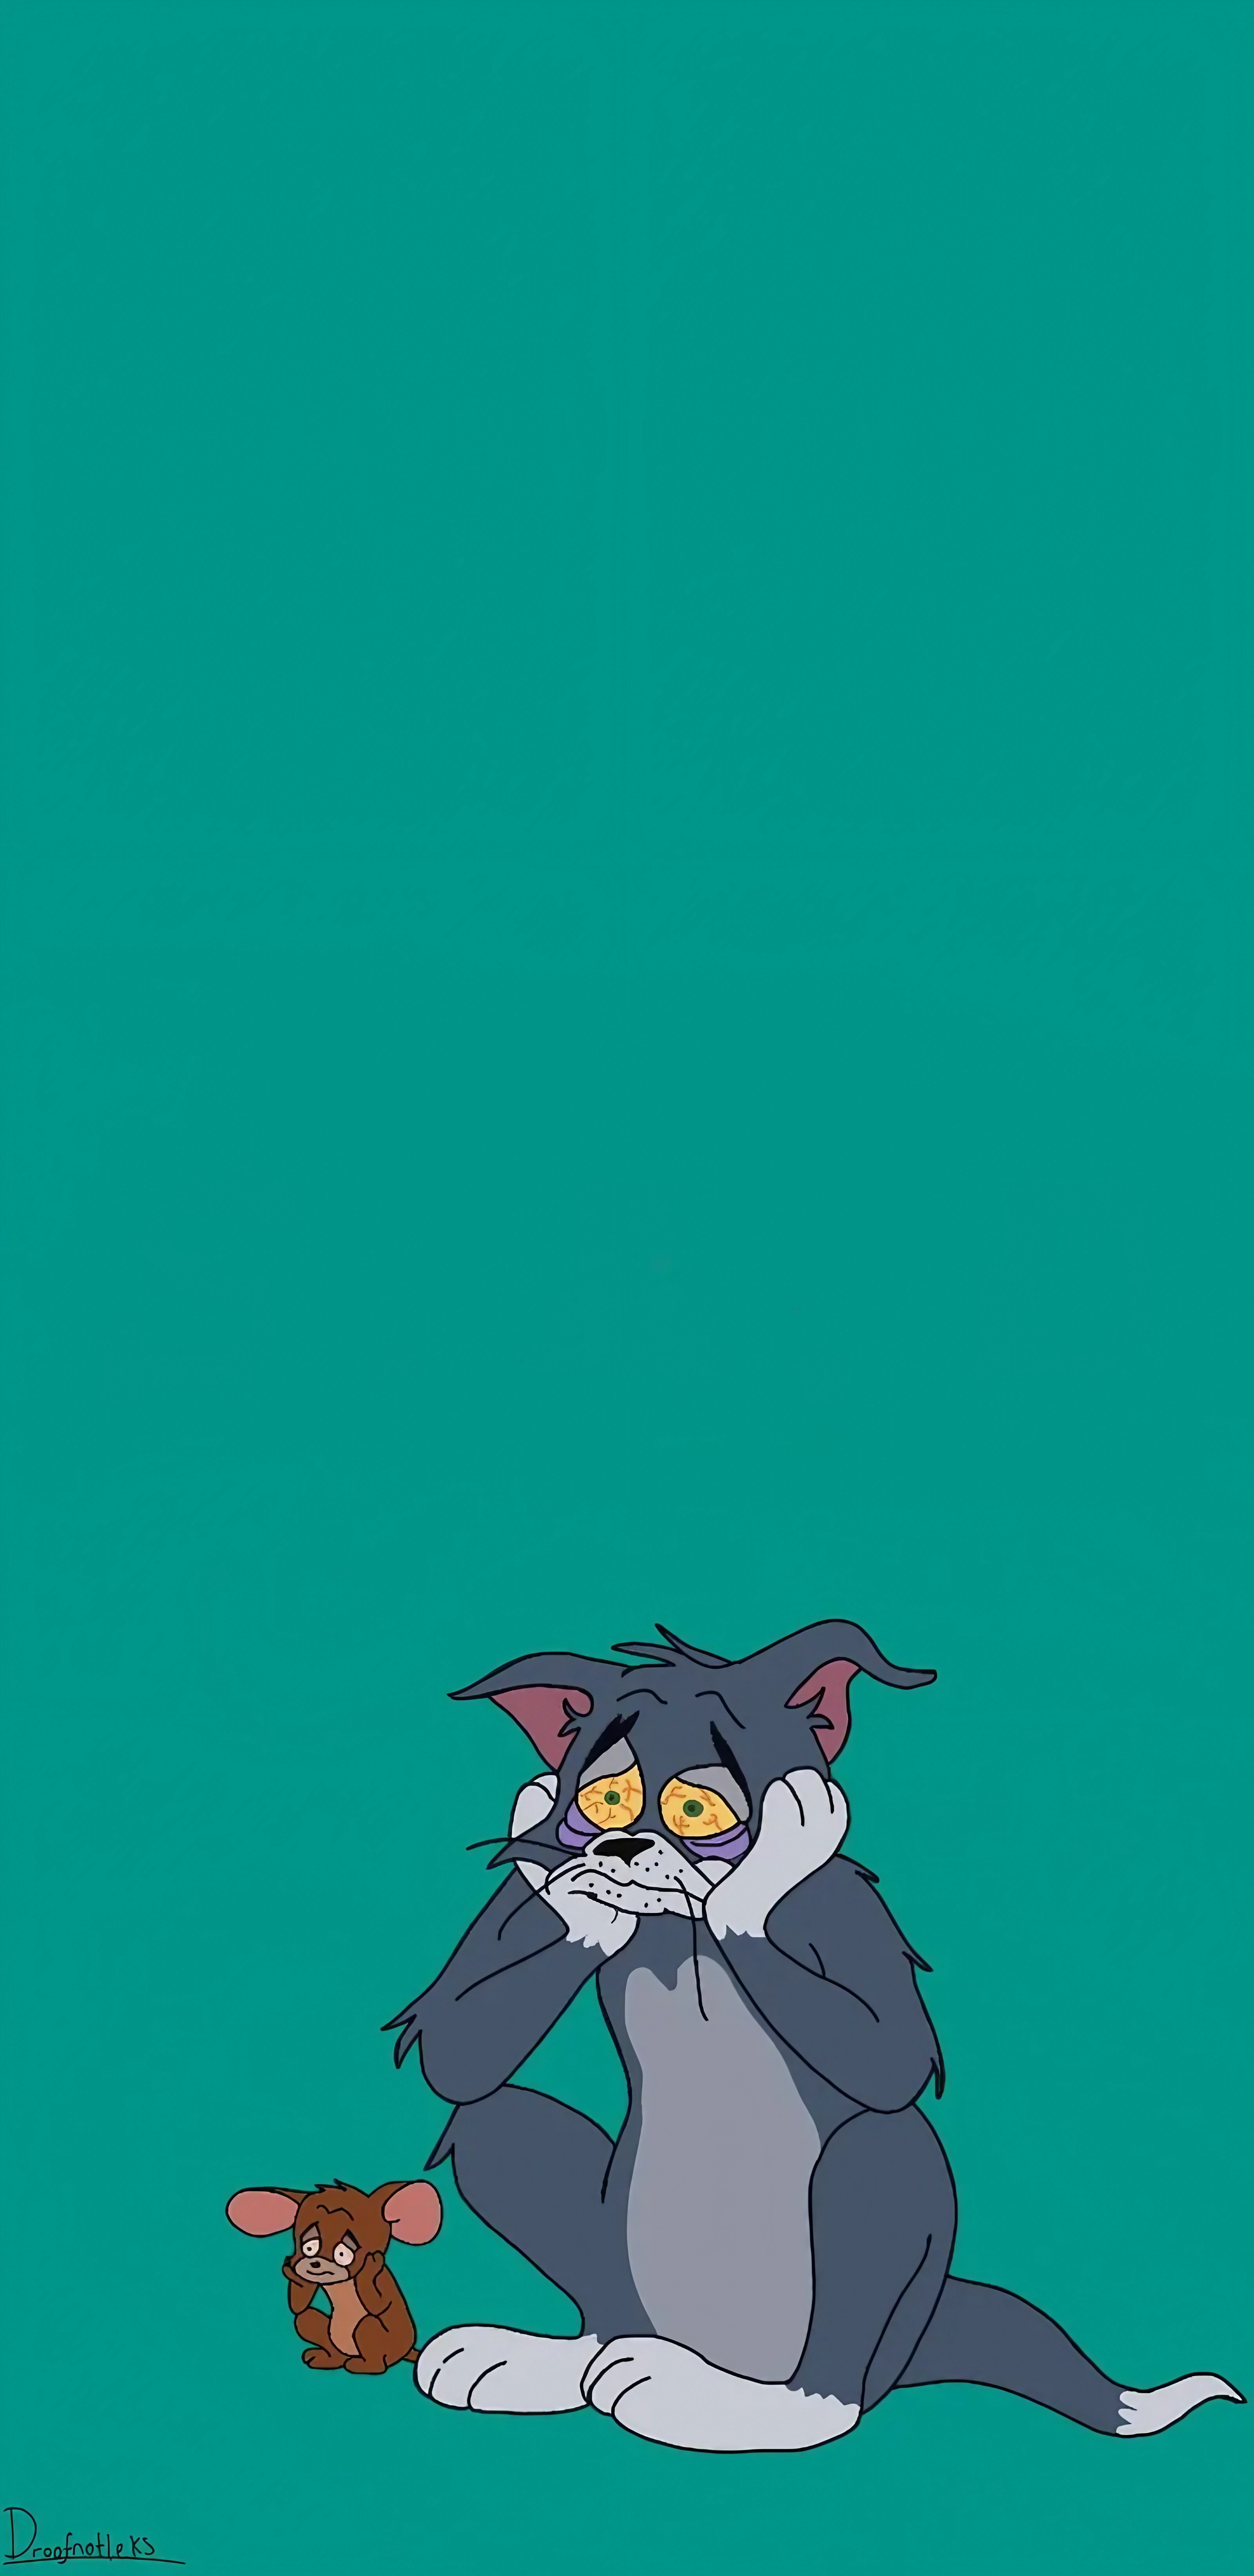 A cartoon cat sitting on the ground with its mouth open - Tom and Jerry